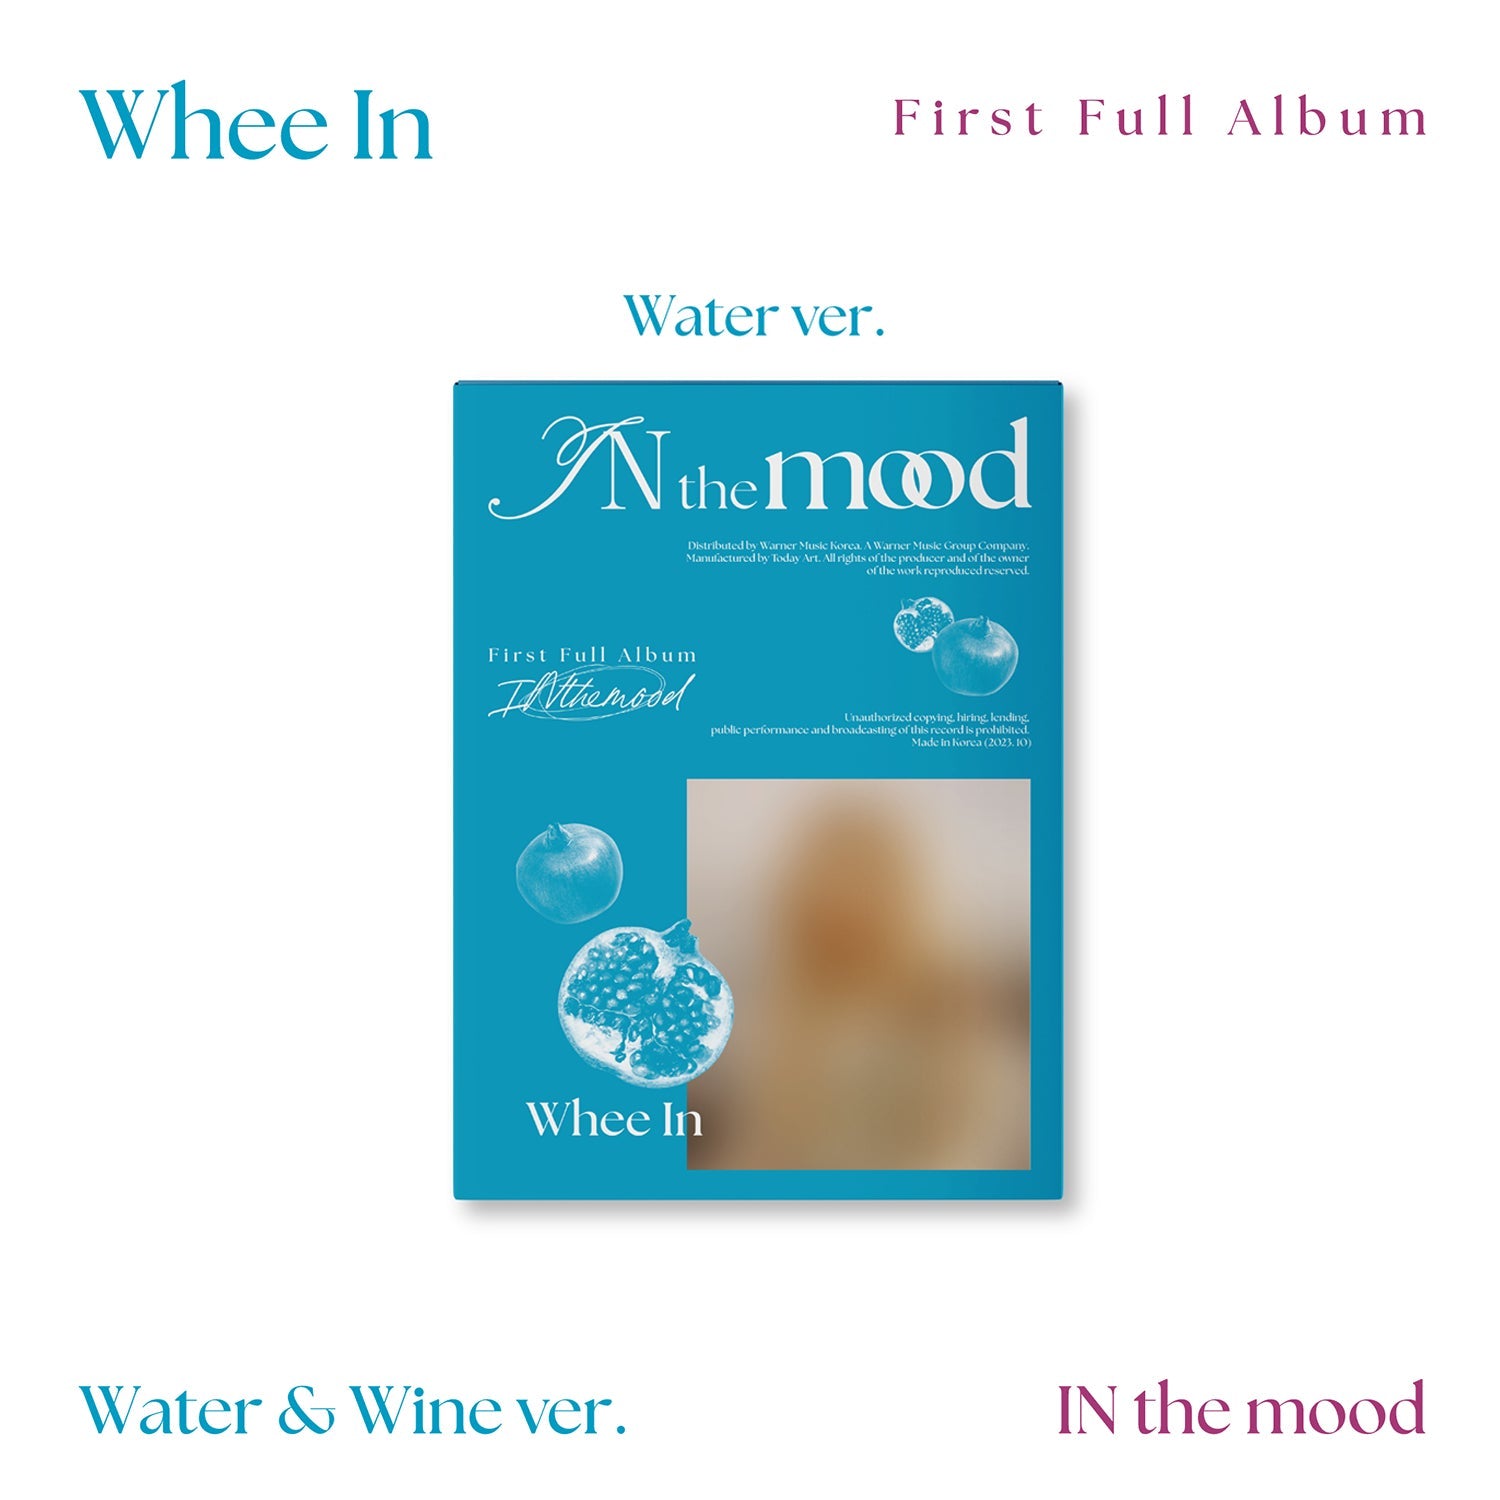 WHEE IN 1ST FULL ALBUM 'IN THE MOOD' (PHOTOBOOK) WATER VERSION COVER